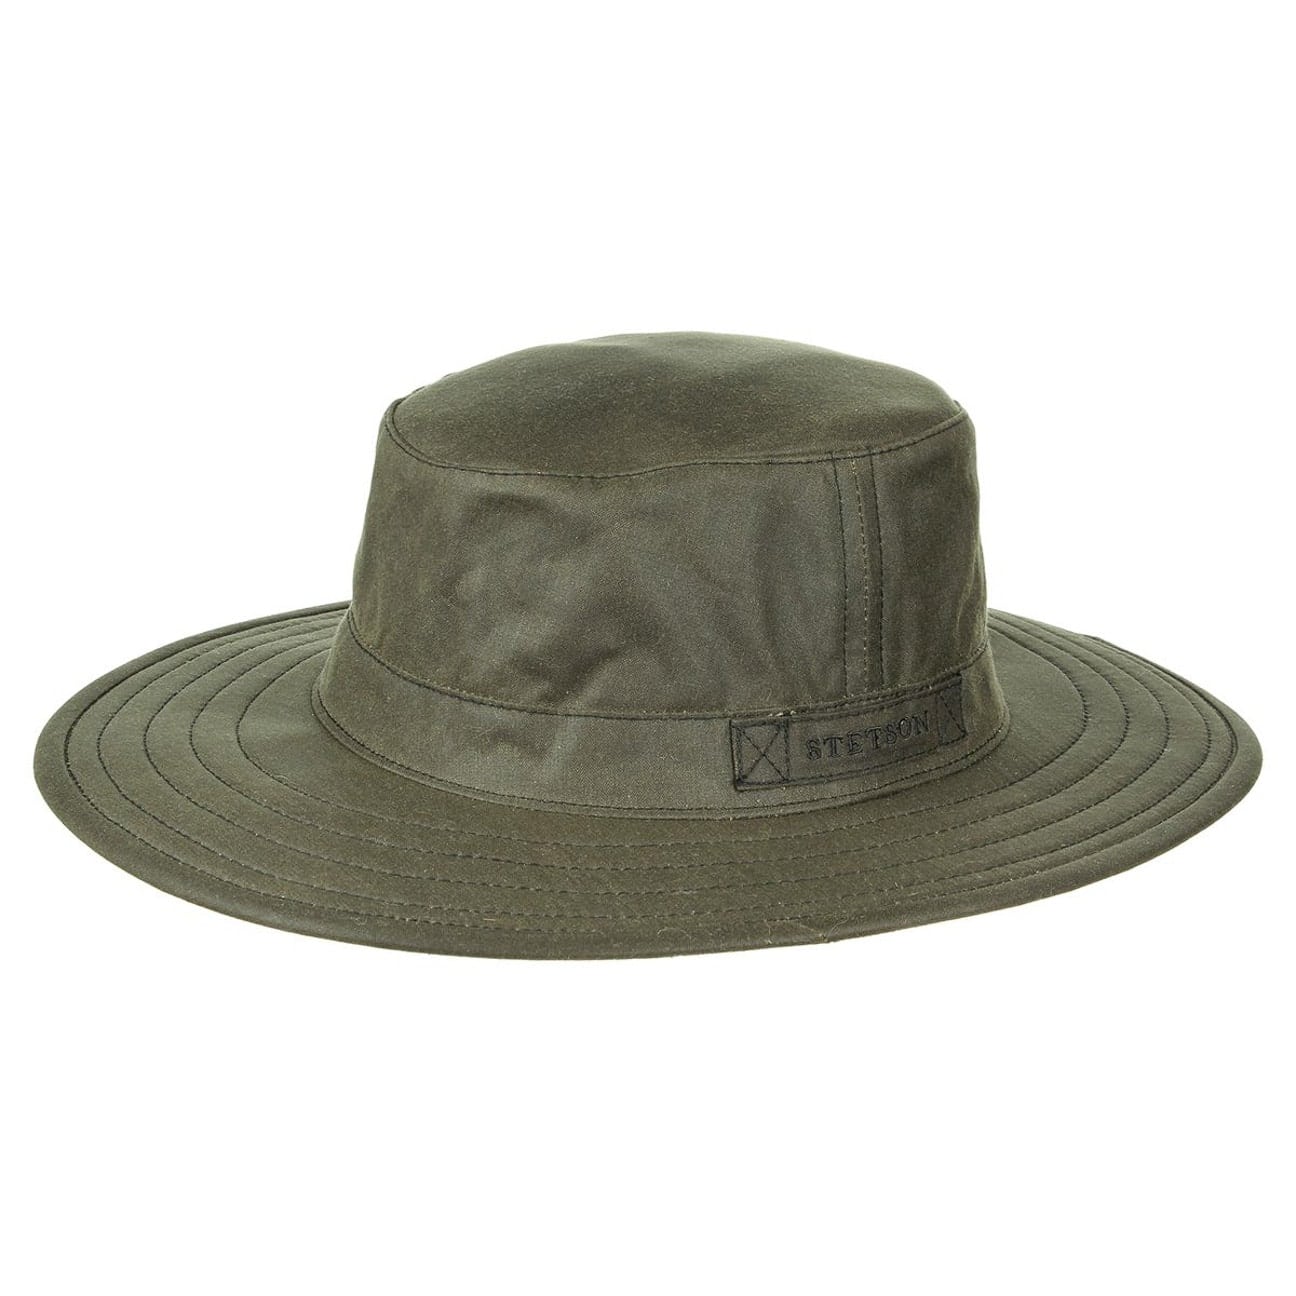 Pompano Waxed Cotton Hat by Stetson, EUR 49,00 --> Hats, caps & beanies ...